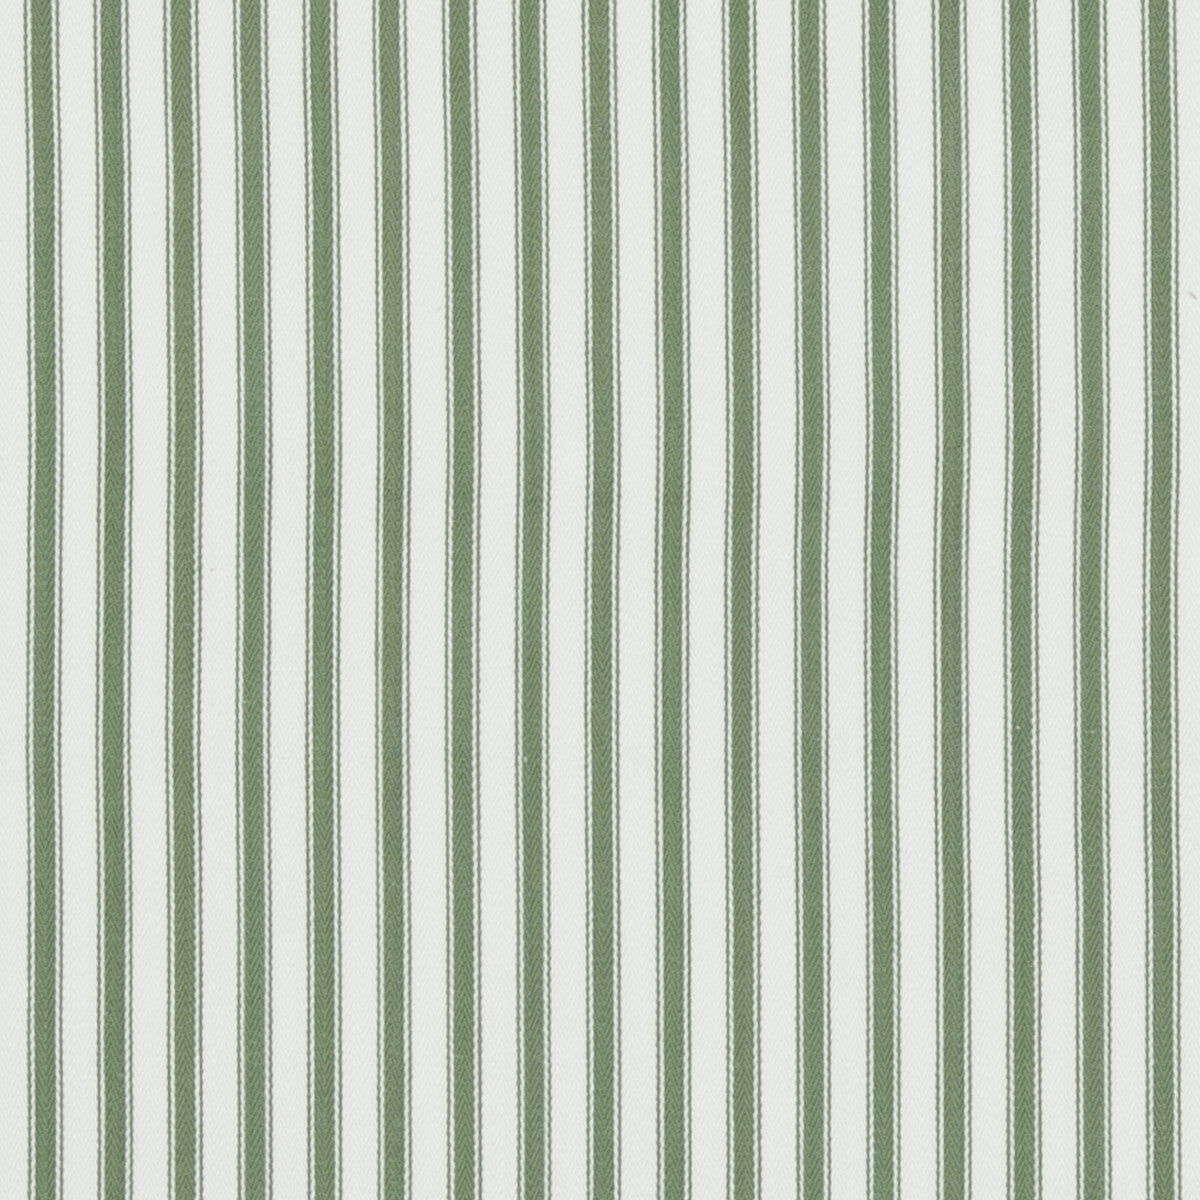 Sherborne Ticking fabric in green color - pattern PF50505.735.0 - by Baker Lifestyle in the Bridport collection